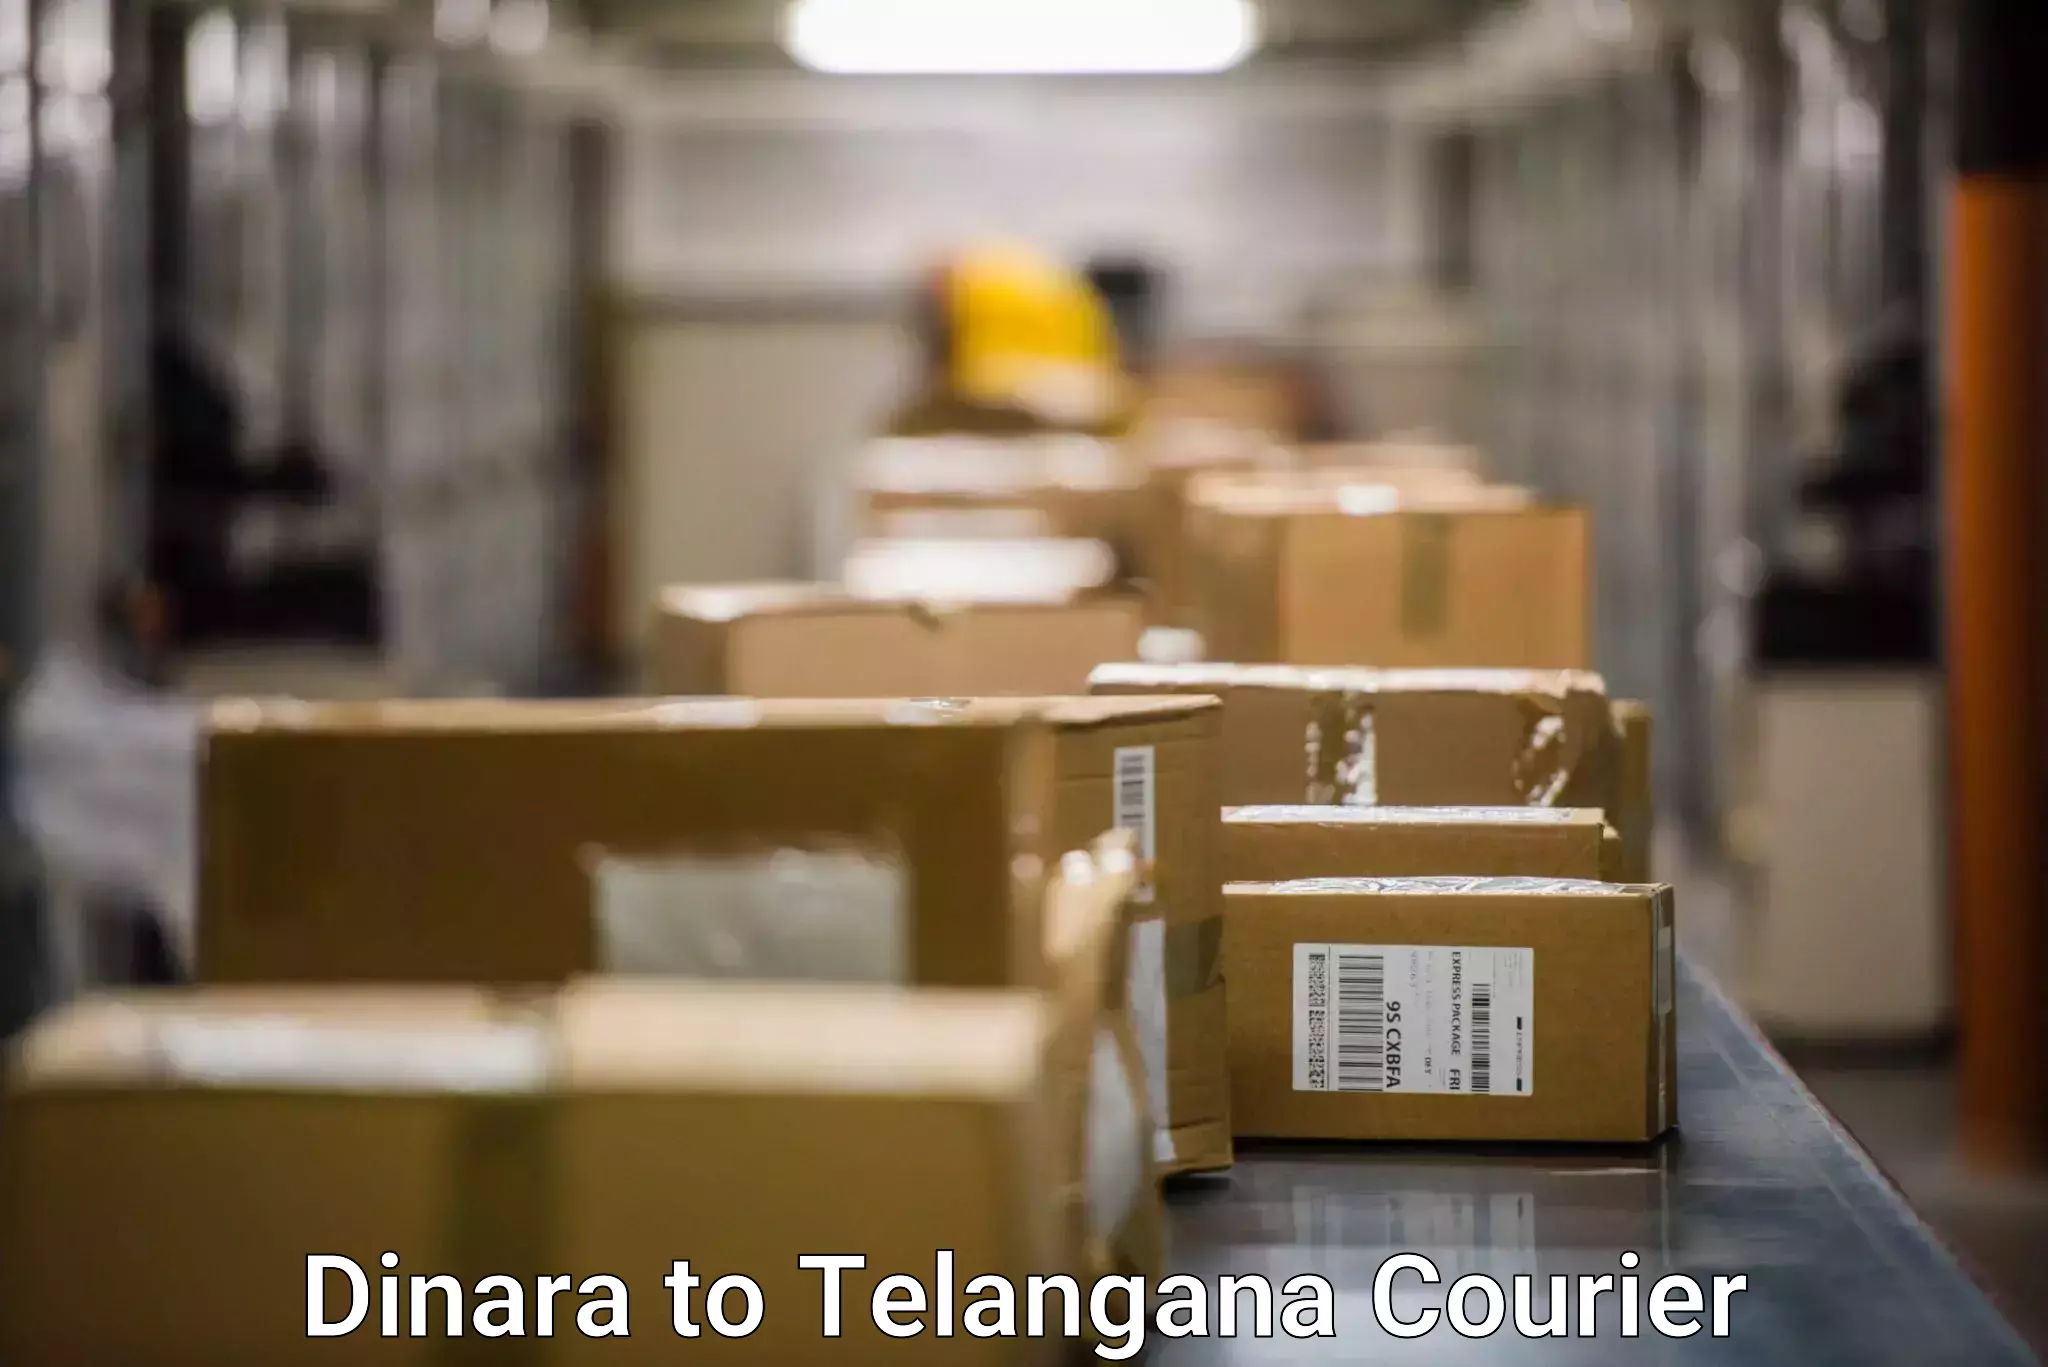 Secure package delivery in Dinara to Hajipur Mancherial